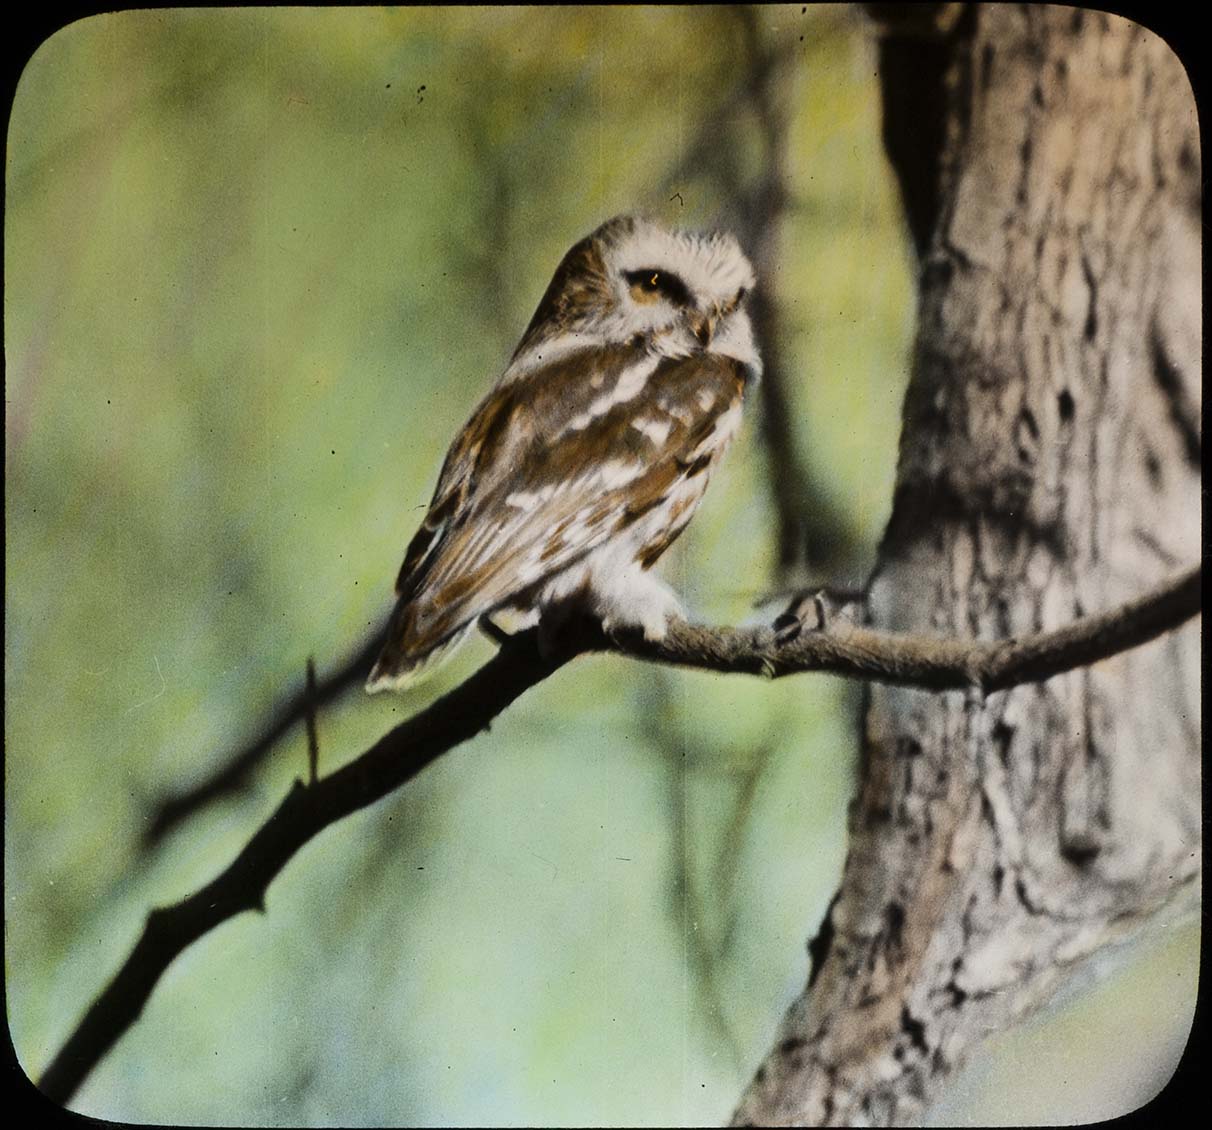 Lantern slide and photograph of a Saw-whet Owl perching on a tree branch